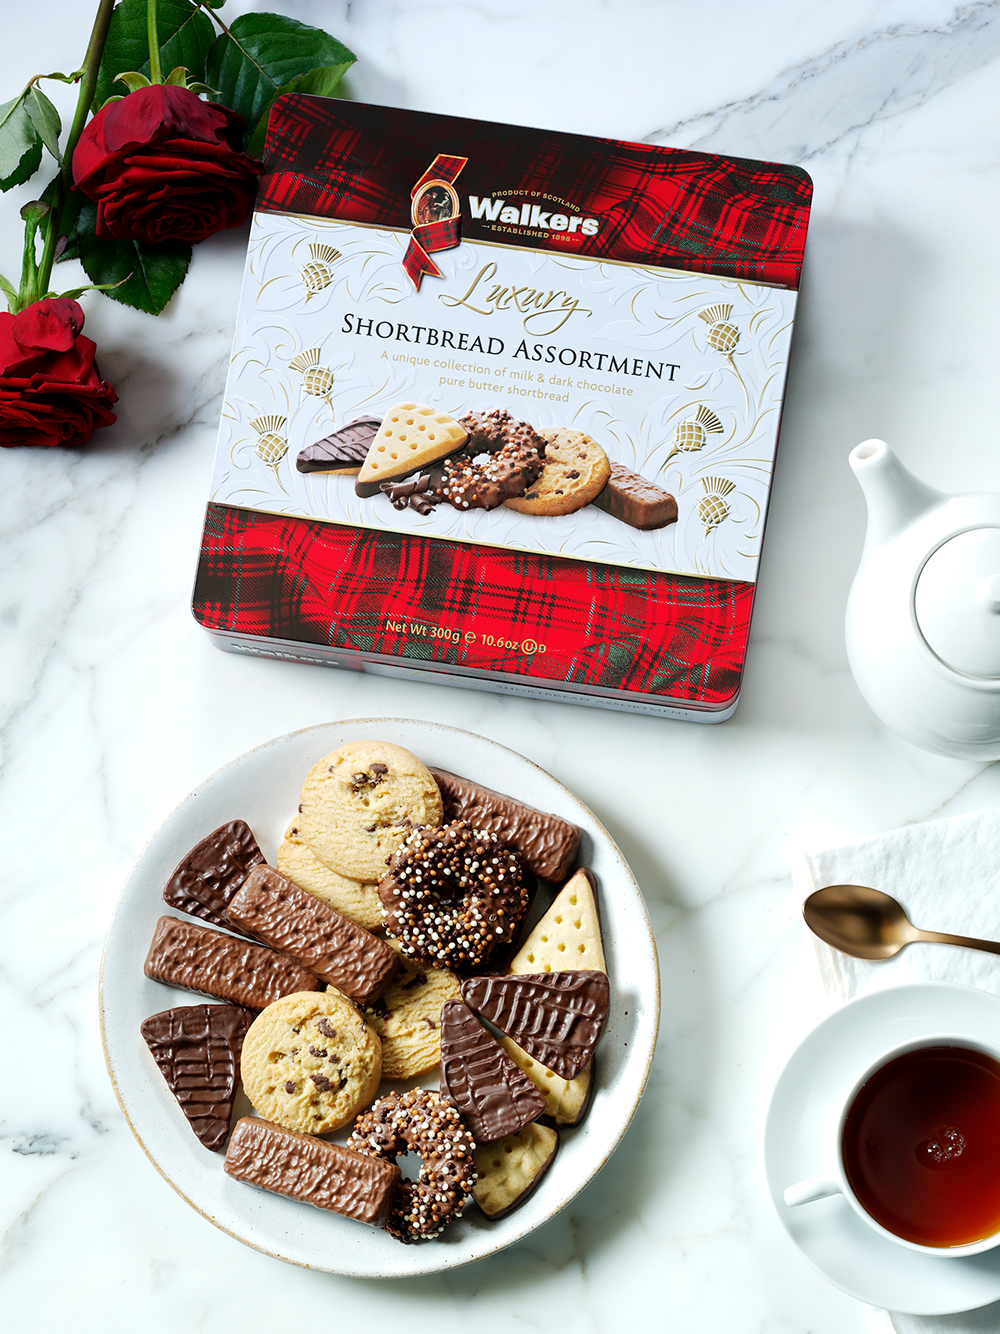 Walkers Chocolate Shortbread Assortment on a table with red roses and a cup of tea